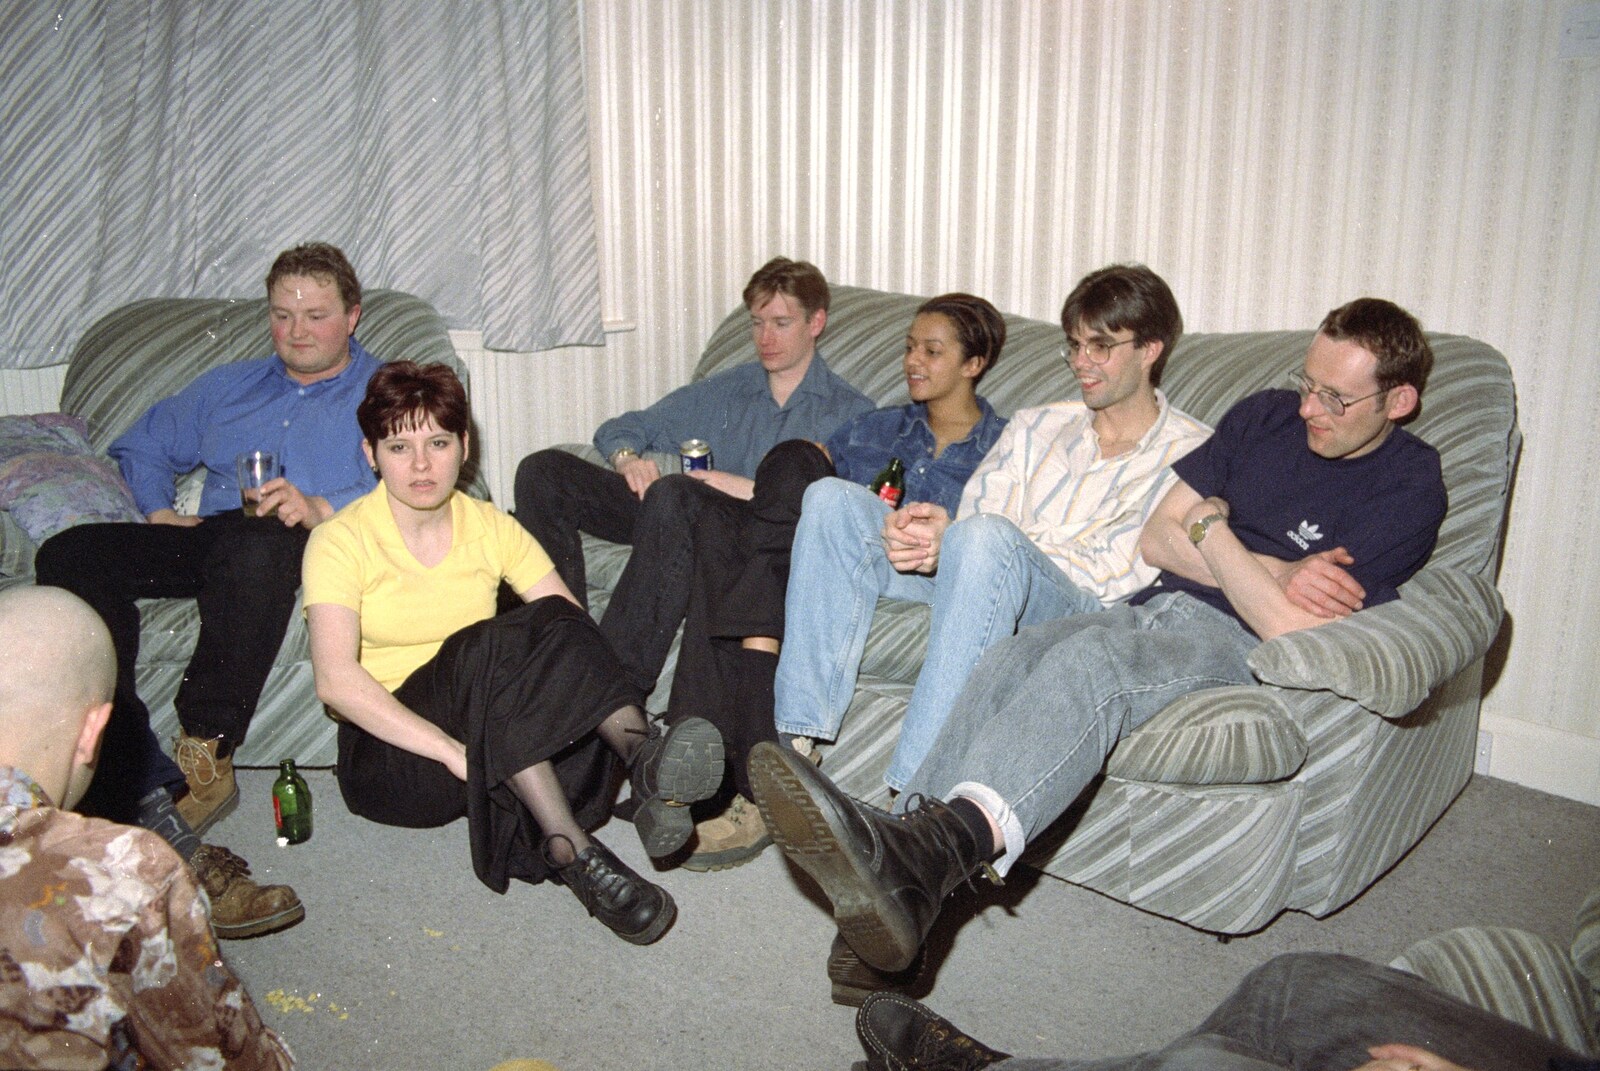 The SCC gang from Dougie's Birthday and Adrian Leaves CISU, Ipswich, Suffolk - 29th June 1997